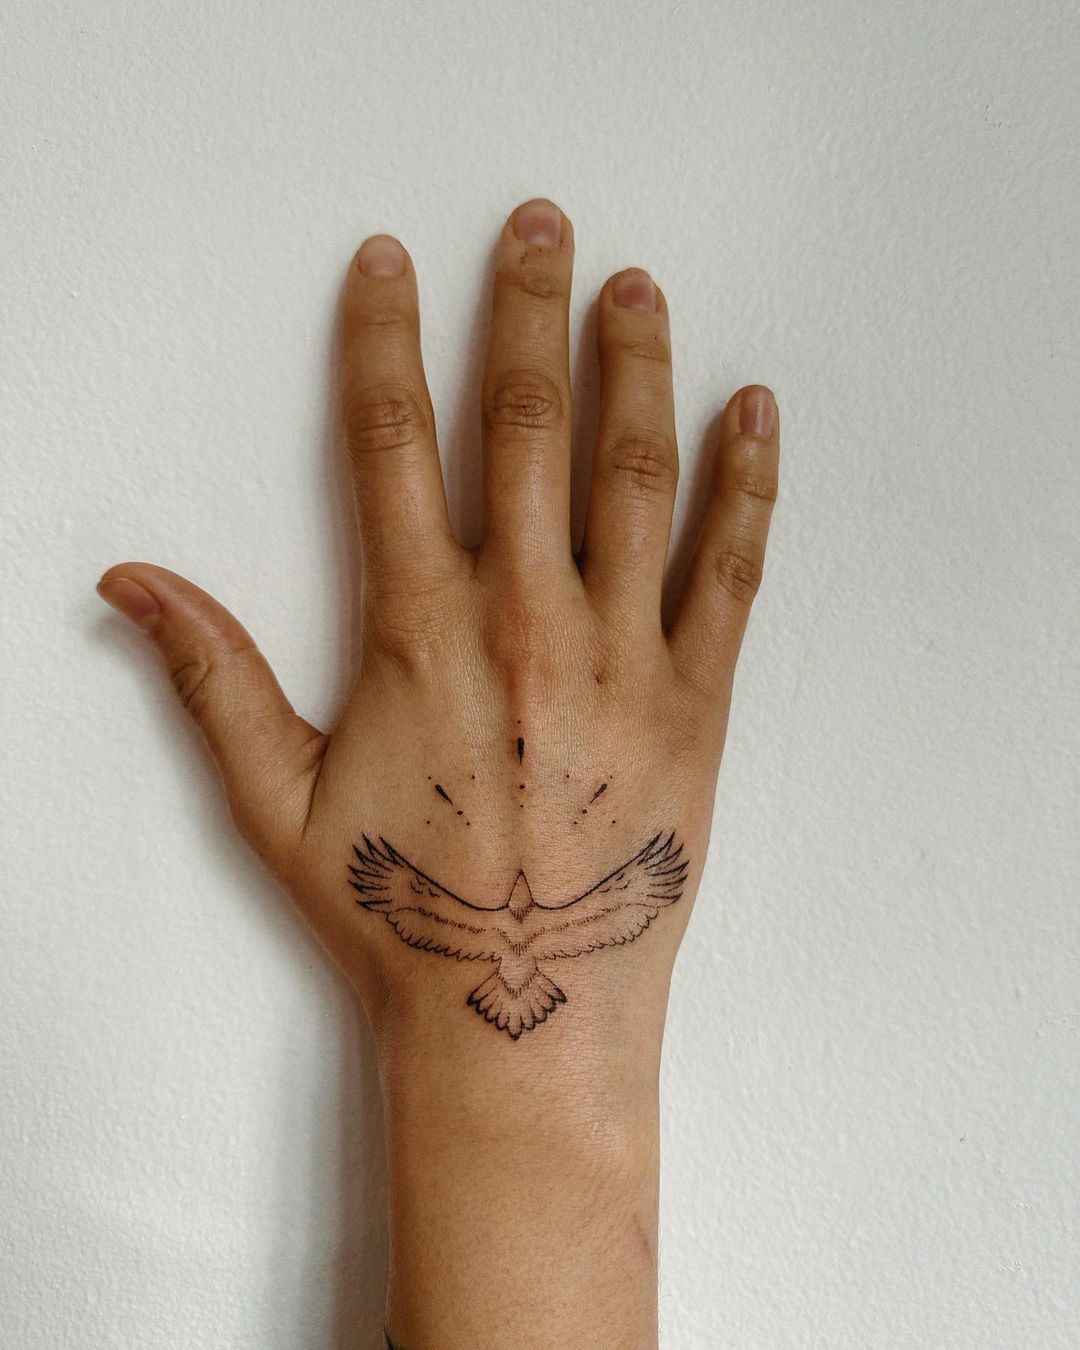 Small eagle tattoo by vasia